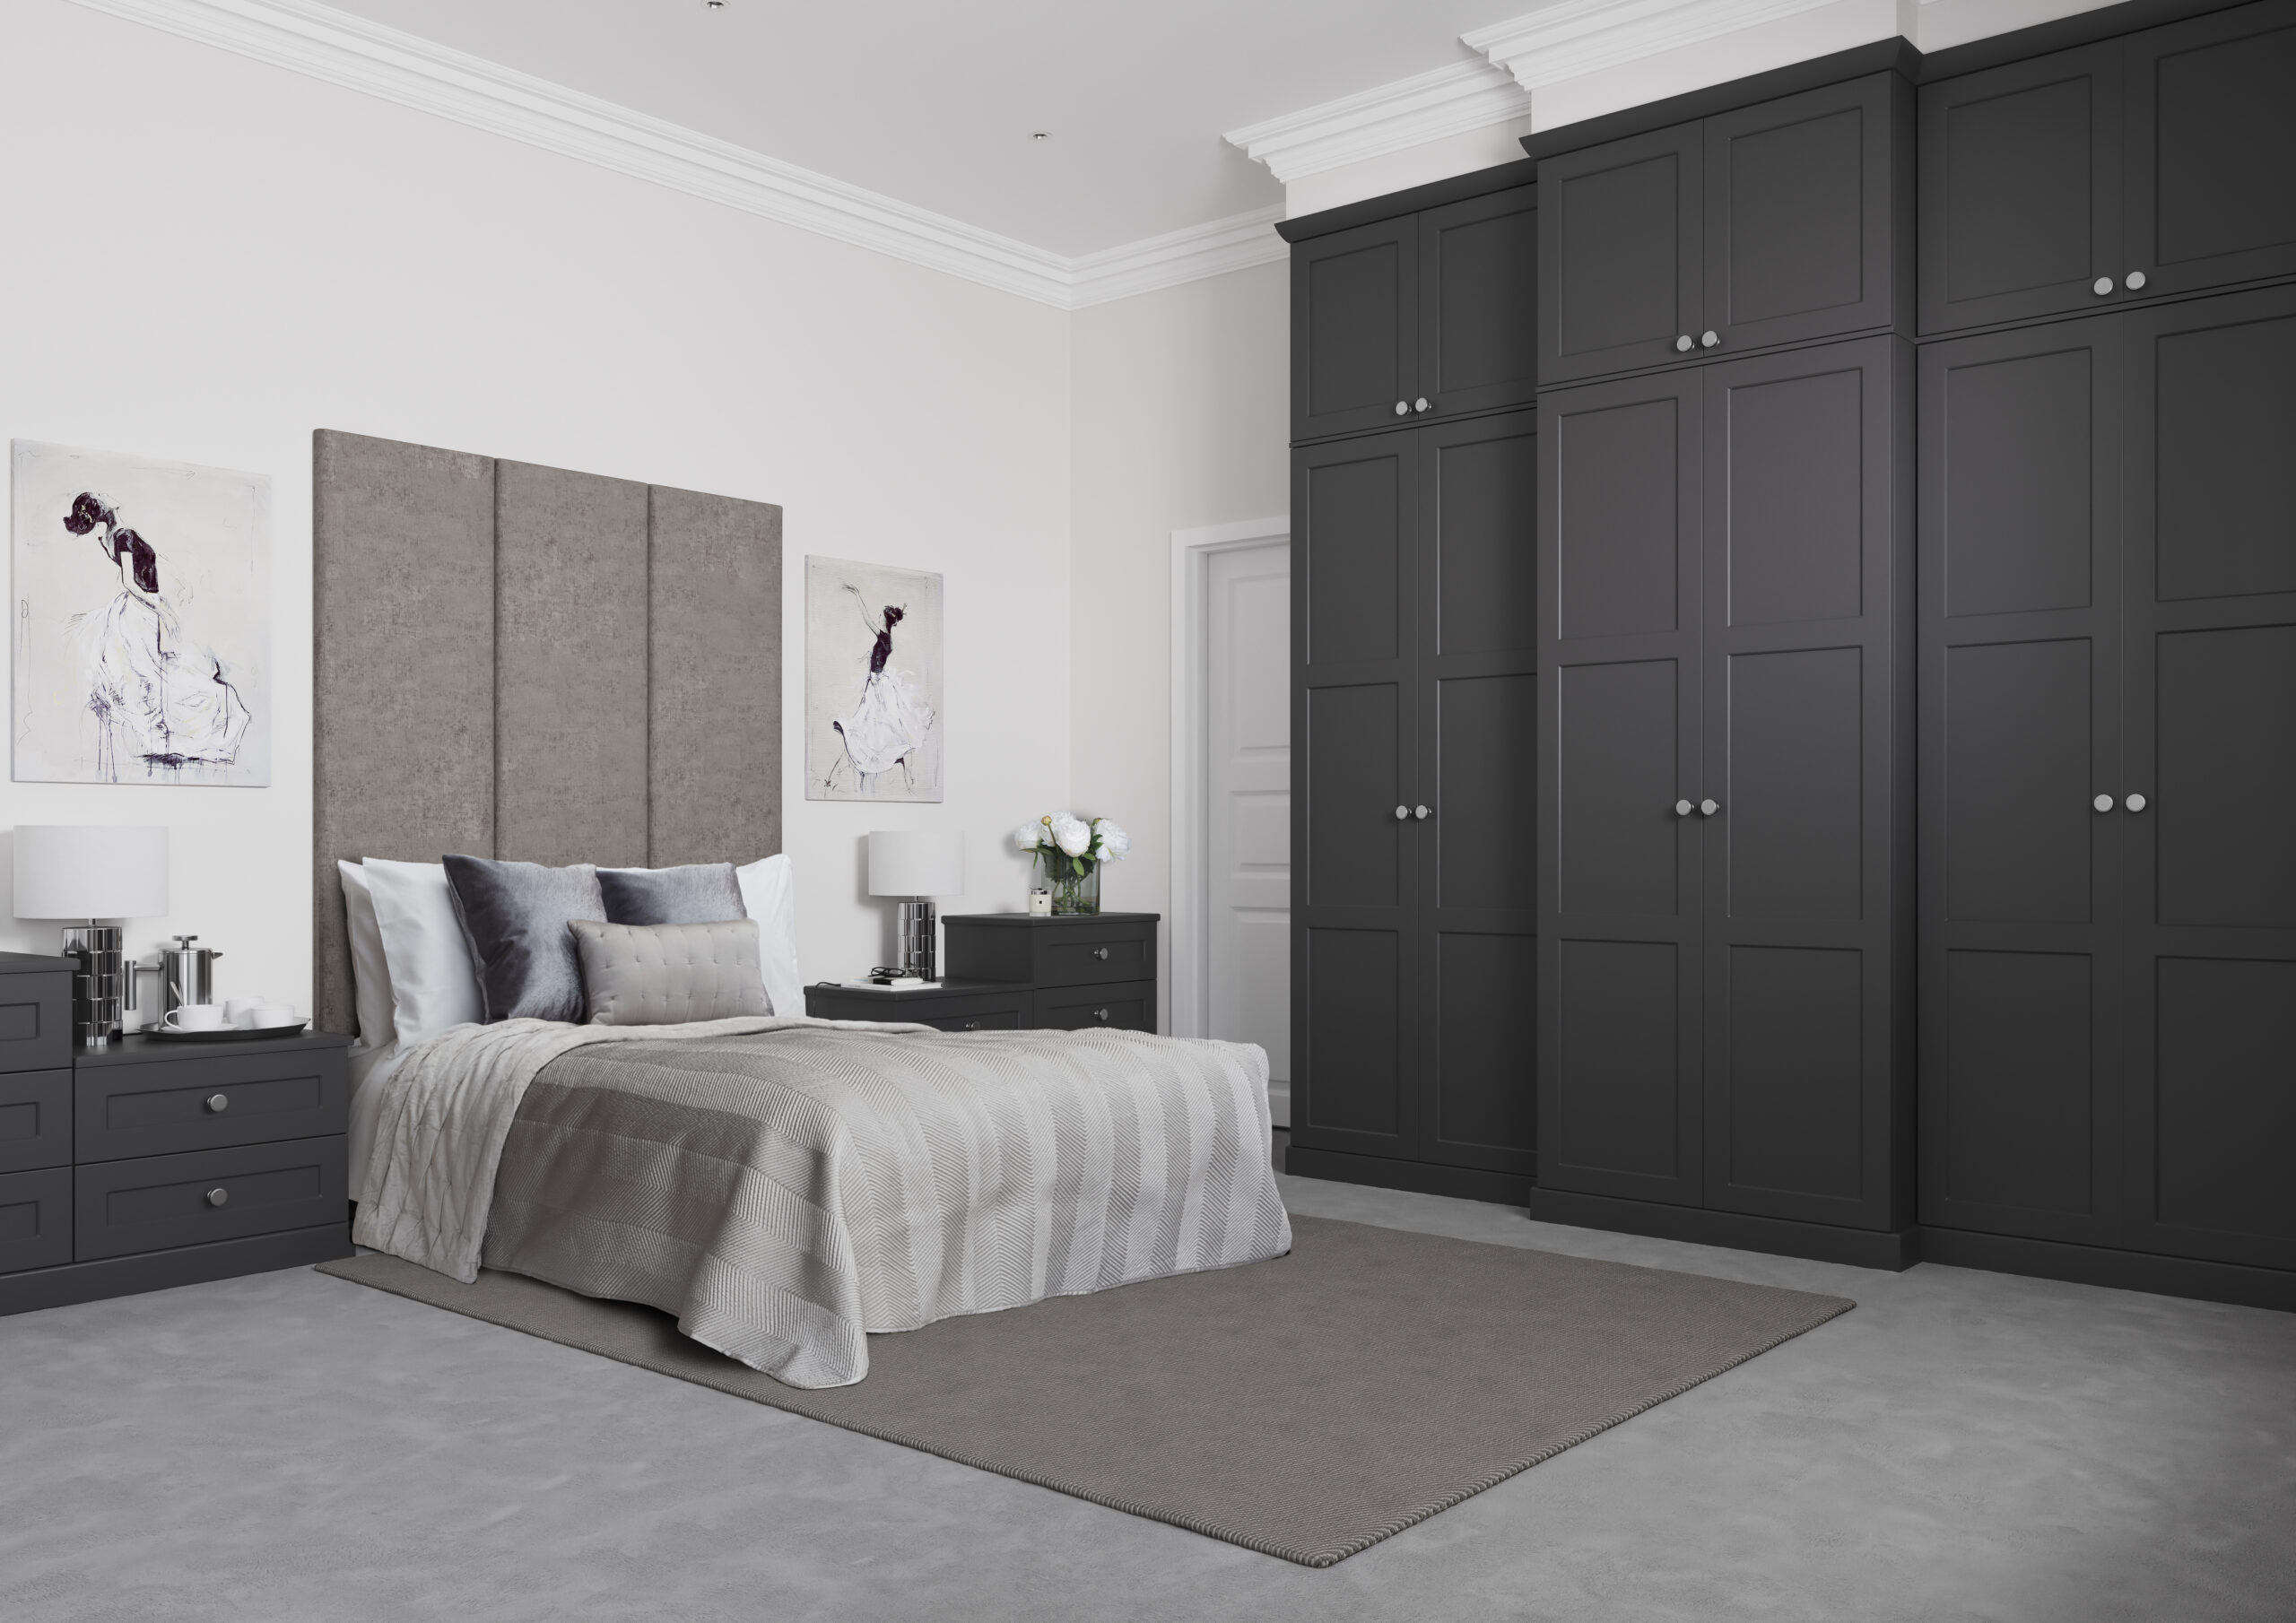 fitted black pannelled wardrobes